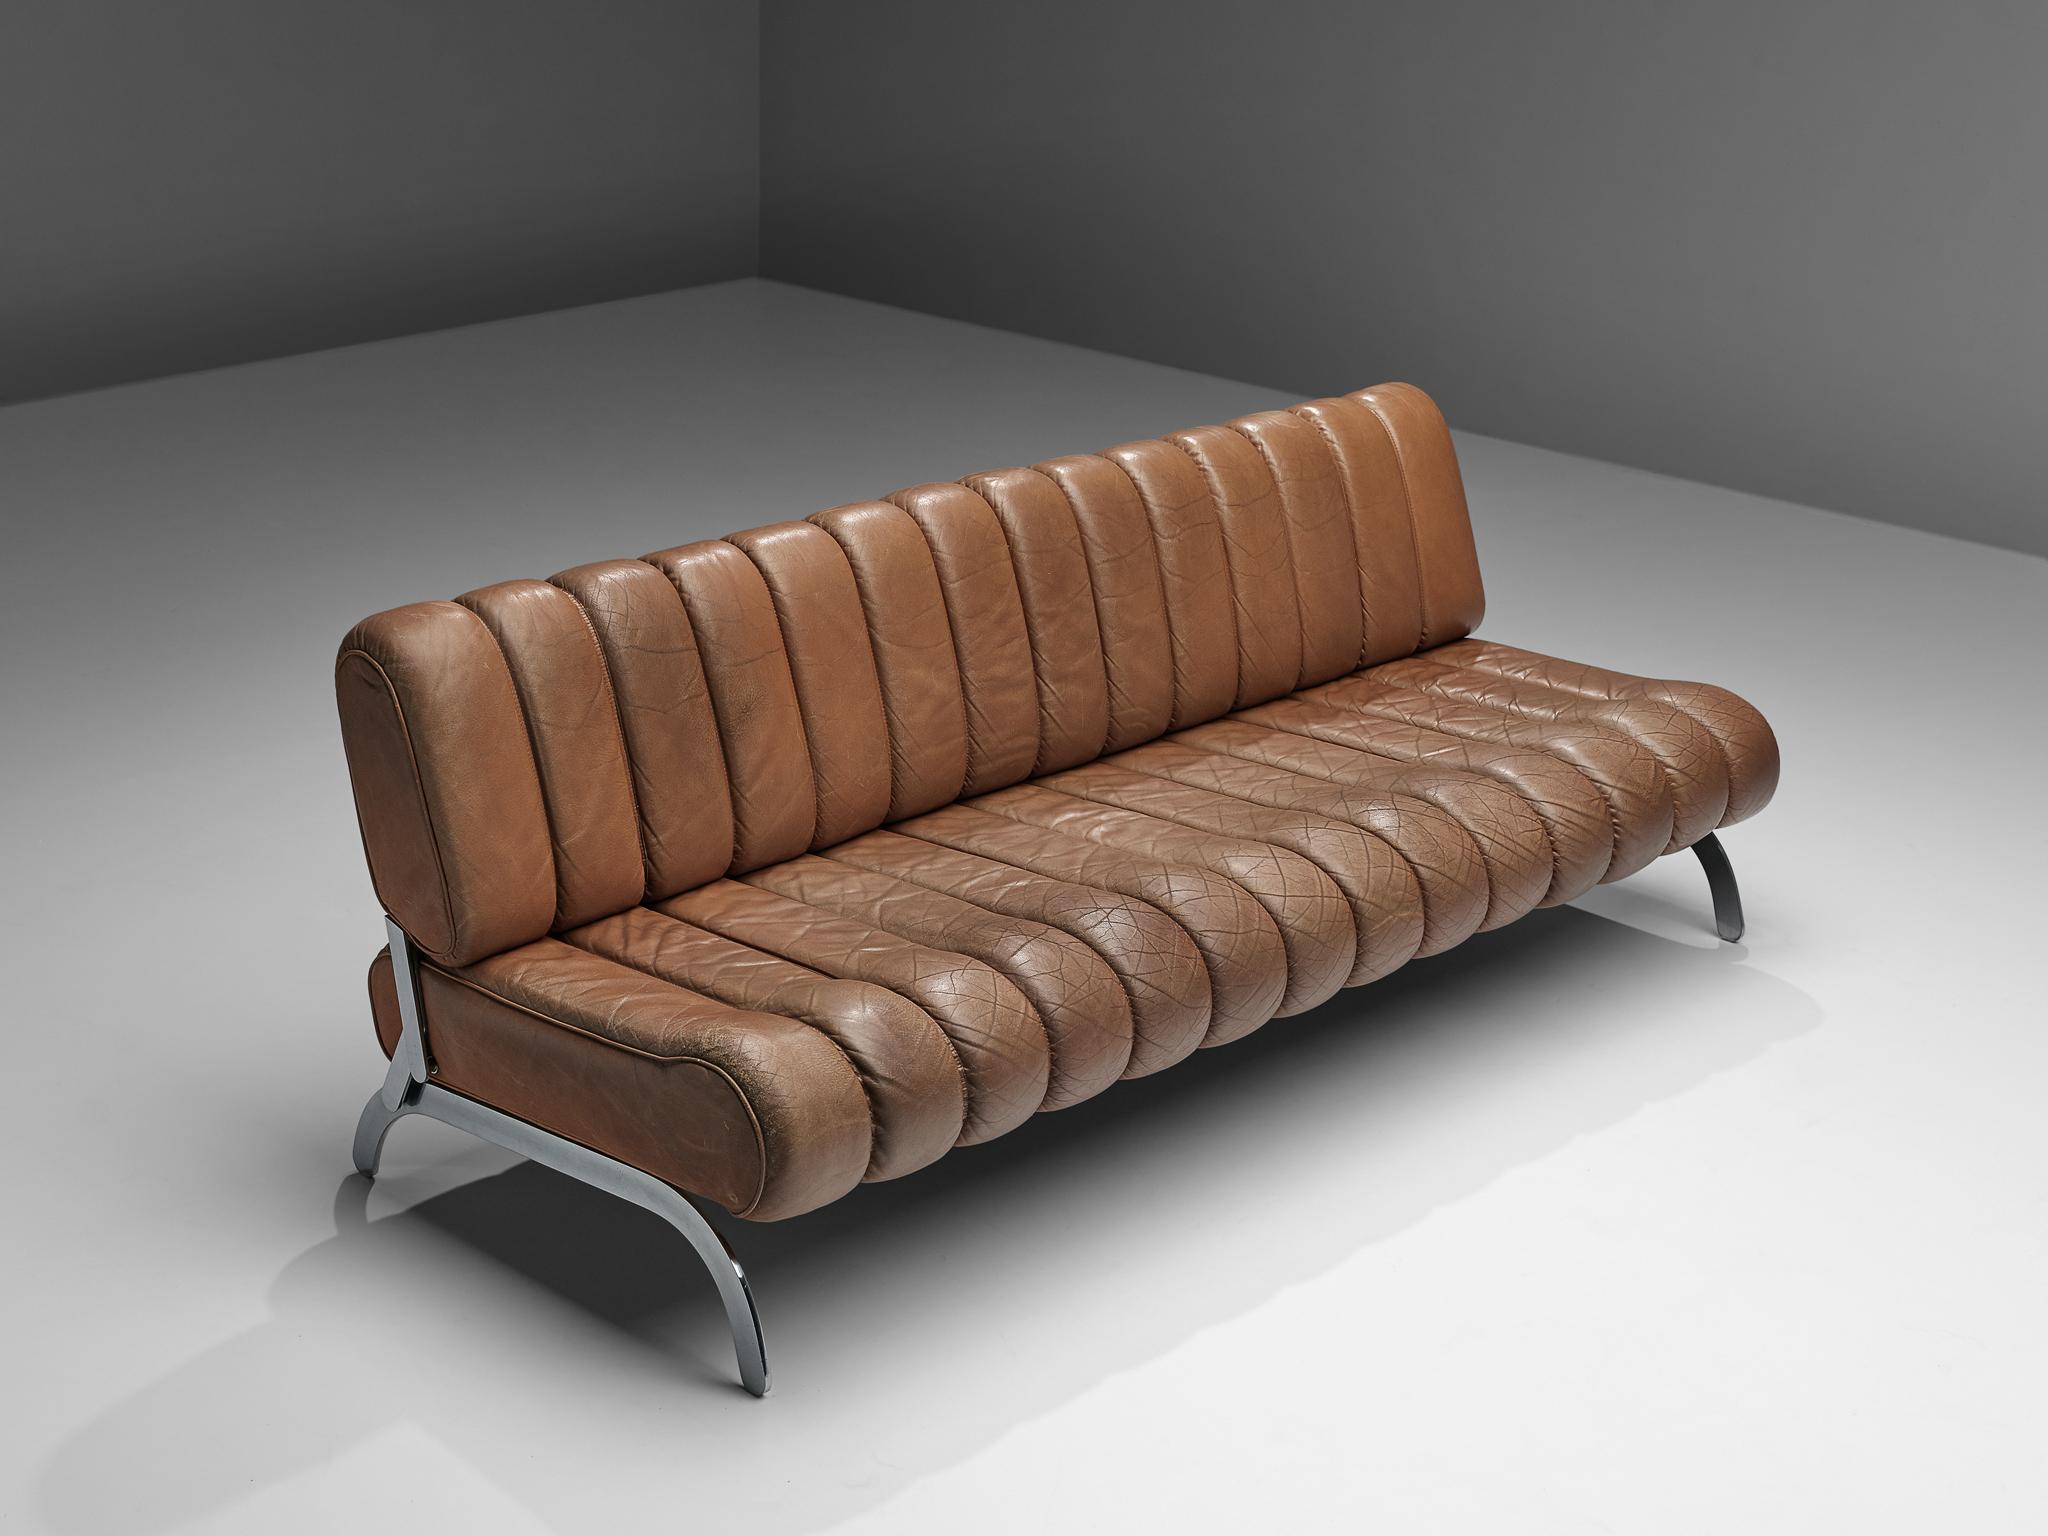 Karl Wittmann for Wittmann Möbelwerkstätten, sofa and daybed 'Independence', leather, steel, Austria, circa 1963

Karl Wittmann designed this rare sofa which may be changed into a daybed by one easy mechanism. The Sofa consists out of two parts, the